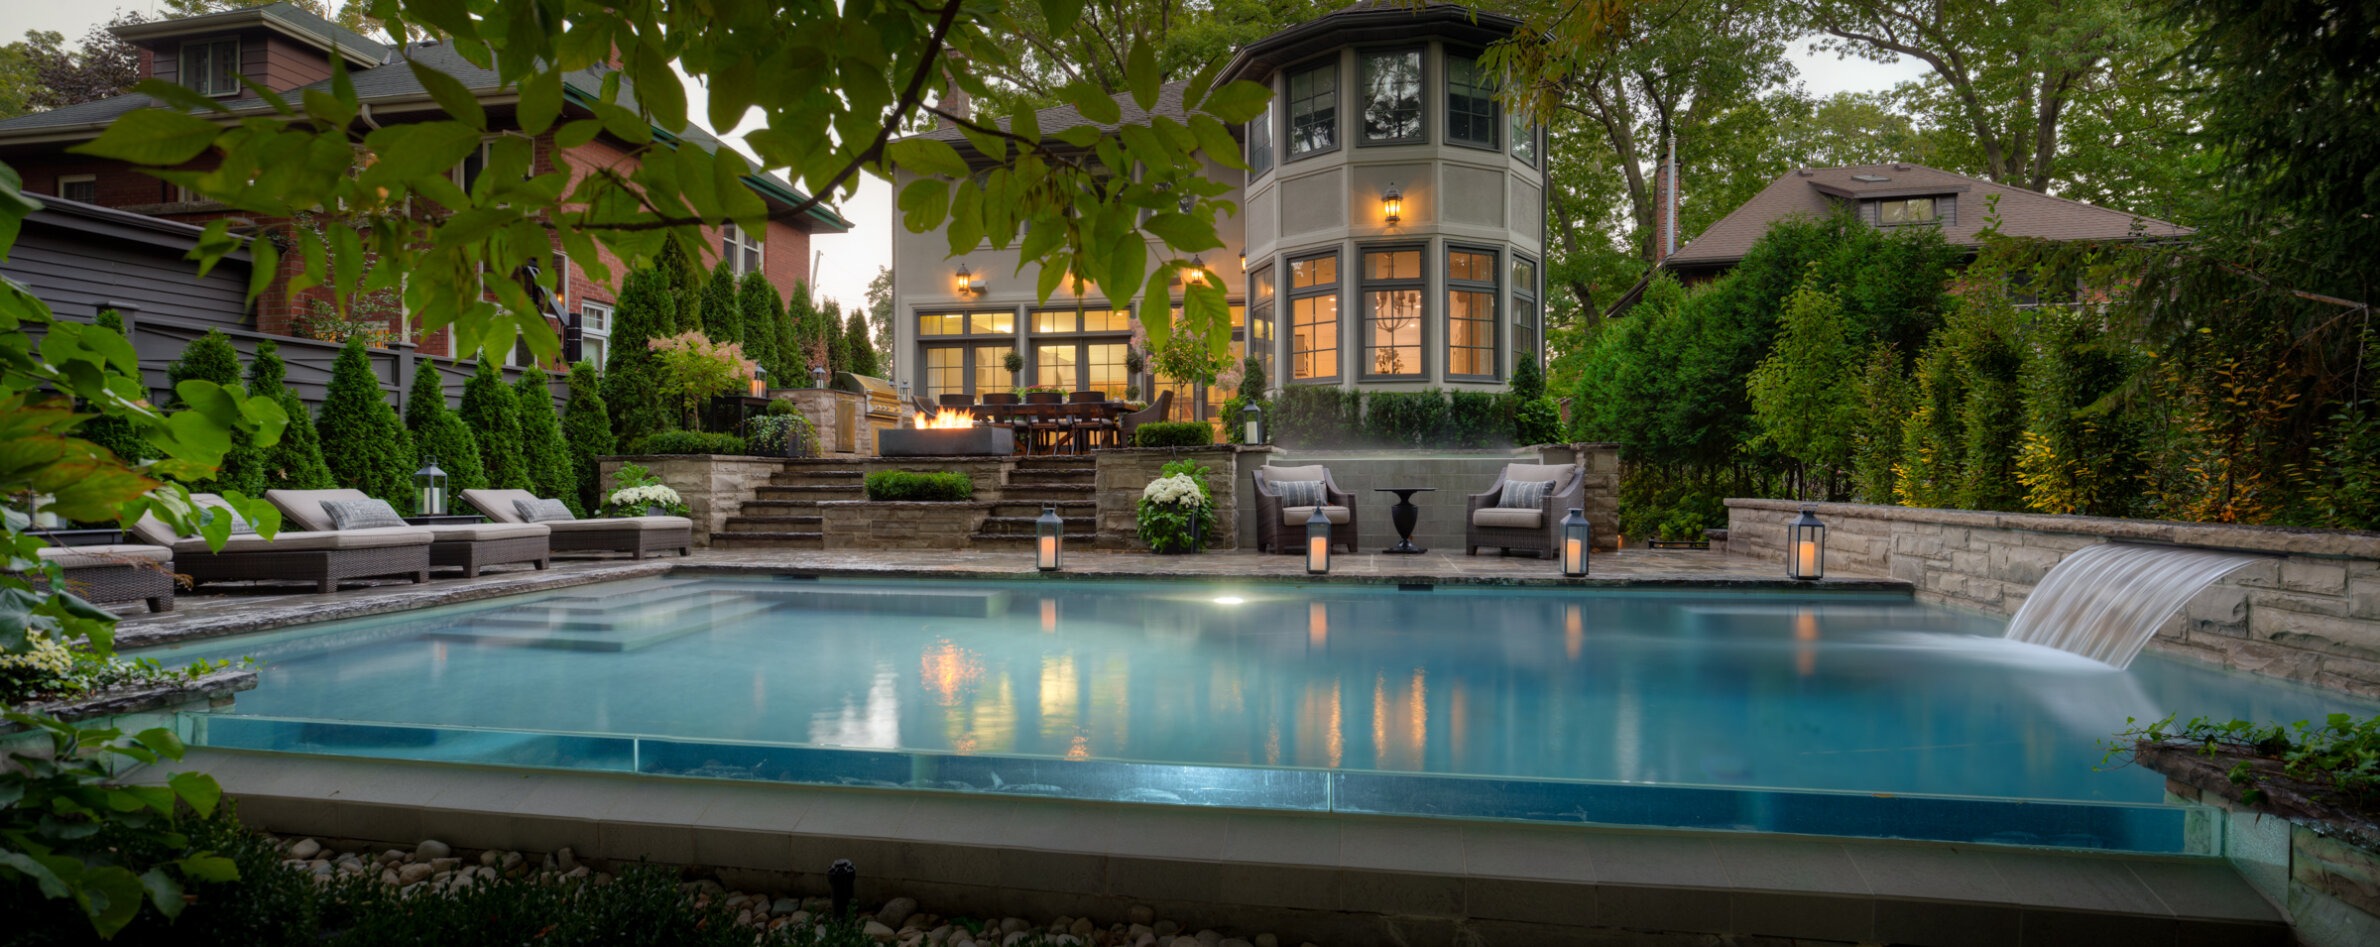 Luxurious backyard at dusk with an illuminated pool, lounge chairs, lush greenery, a cozy fire pit area, and an elegant home in the background.